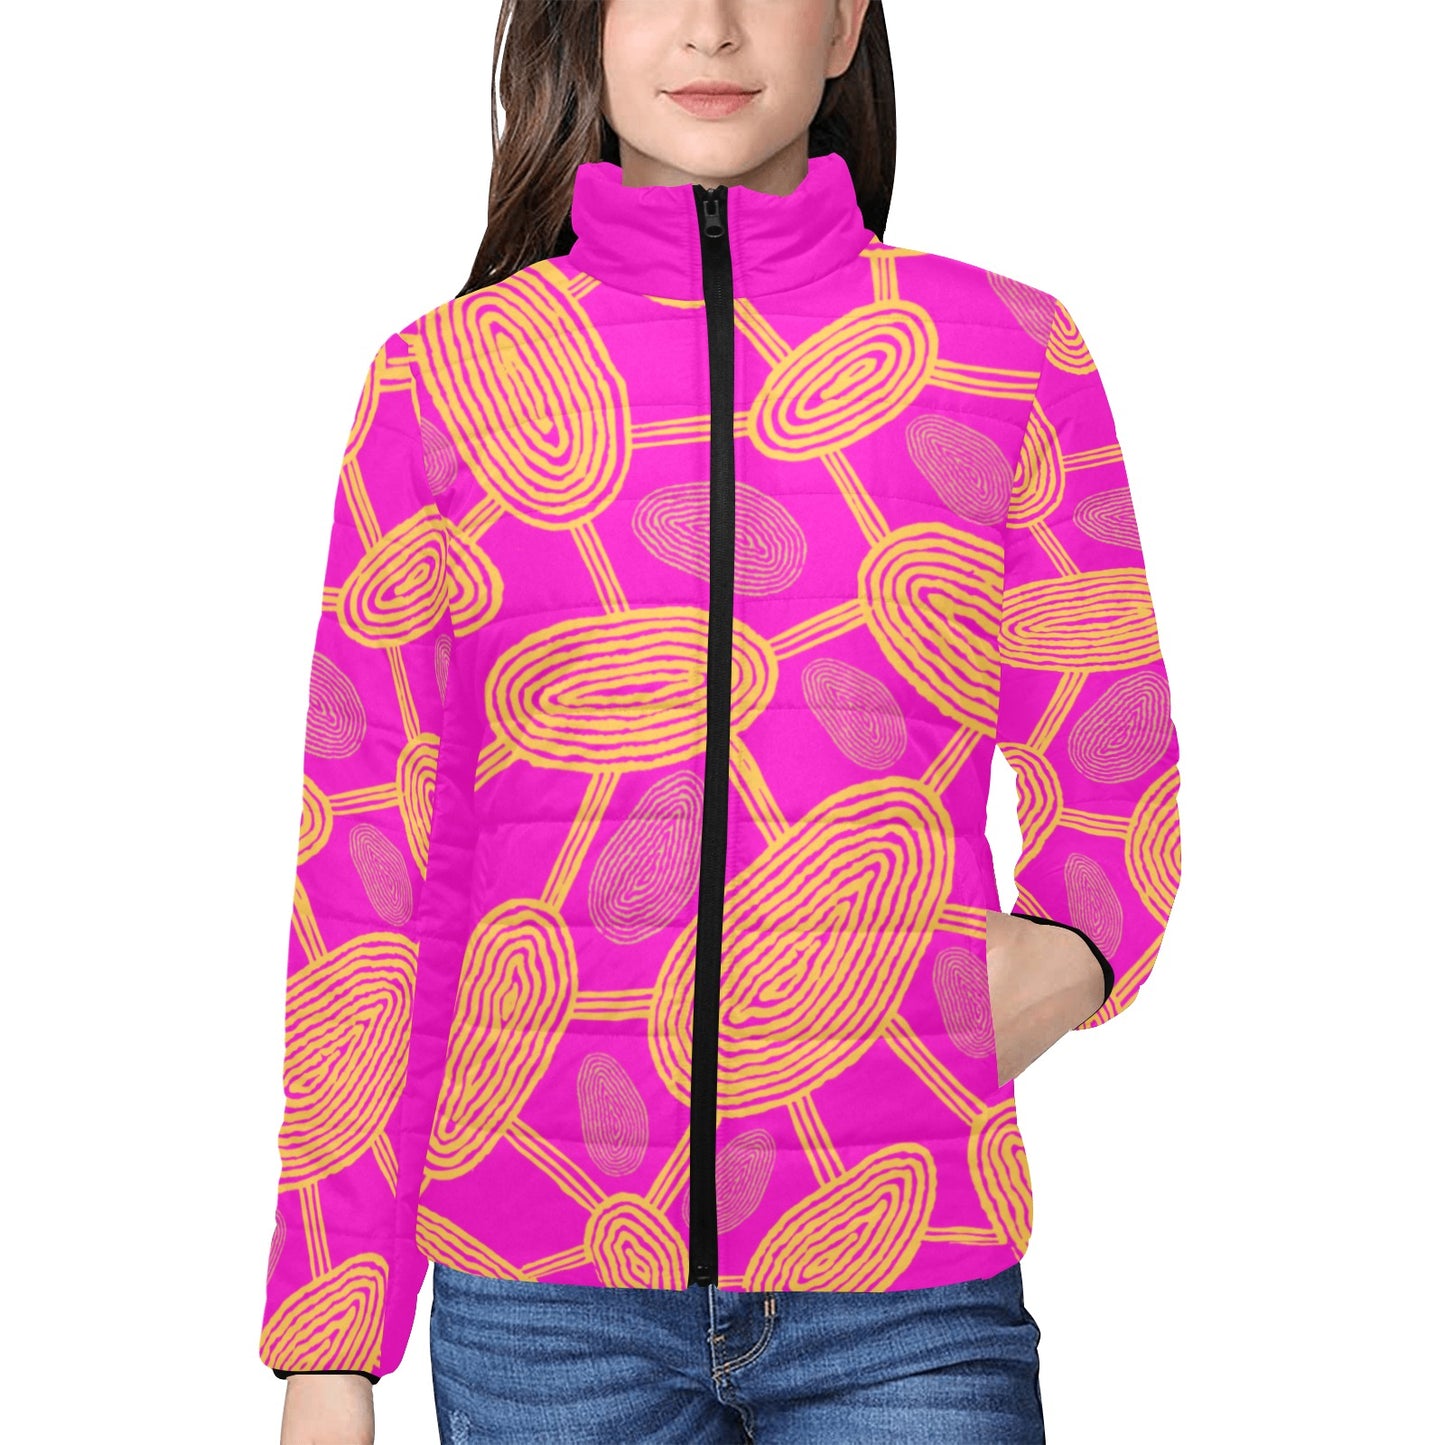 One Eat we all eat women's Puffer Jacket